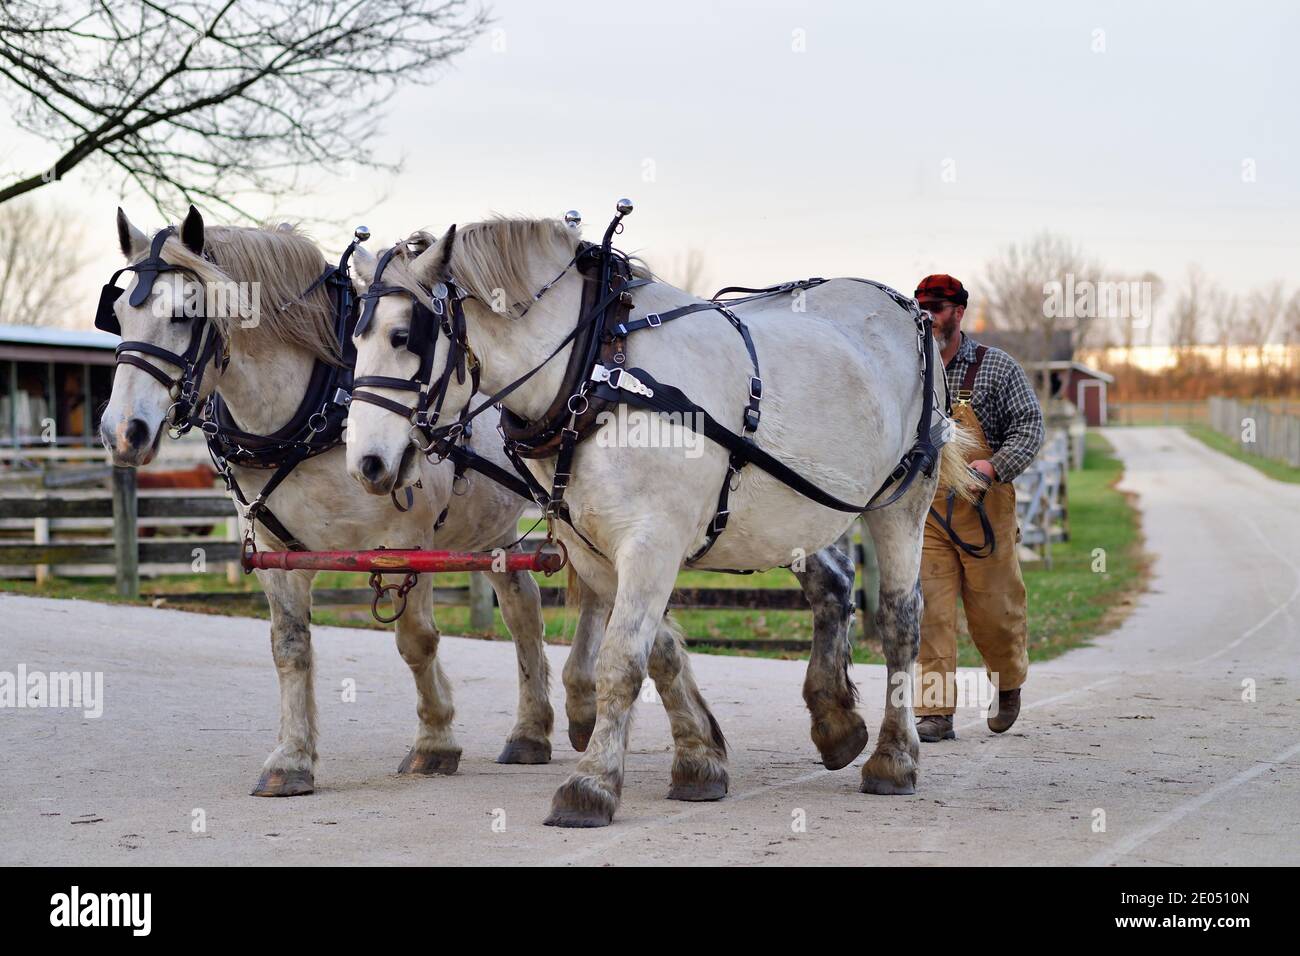 West Chicago, Illinois, USA. Harnessed draft horses after being detached from a carriage head back to the barn after a day's work in the fields. Stock Photo